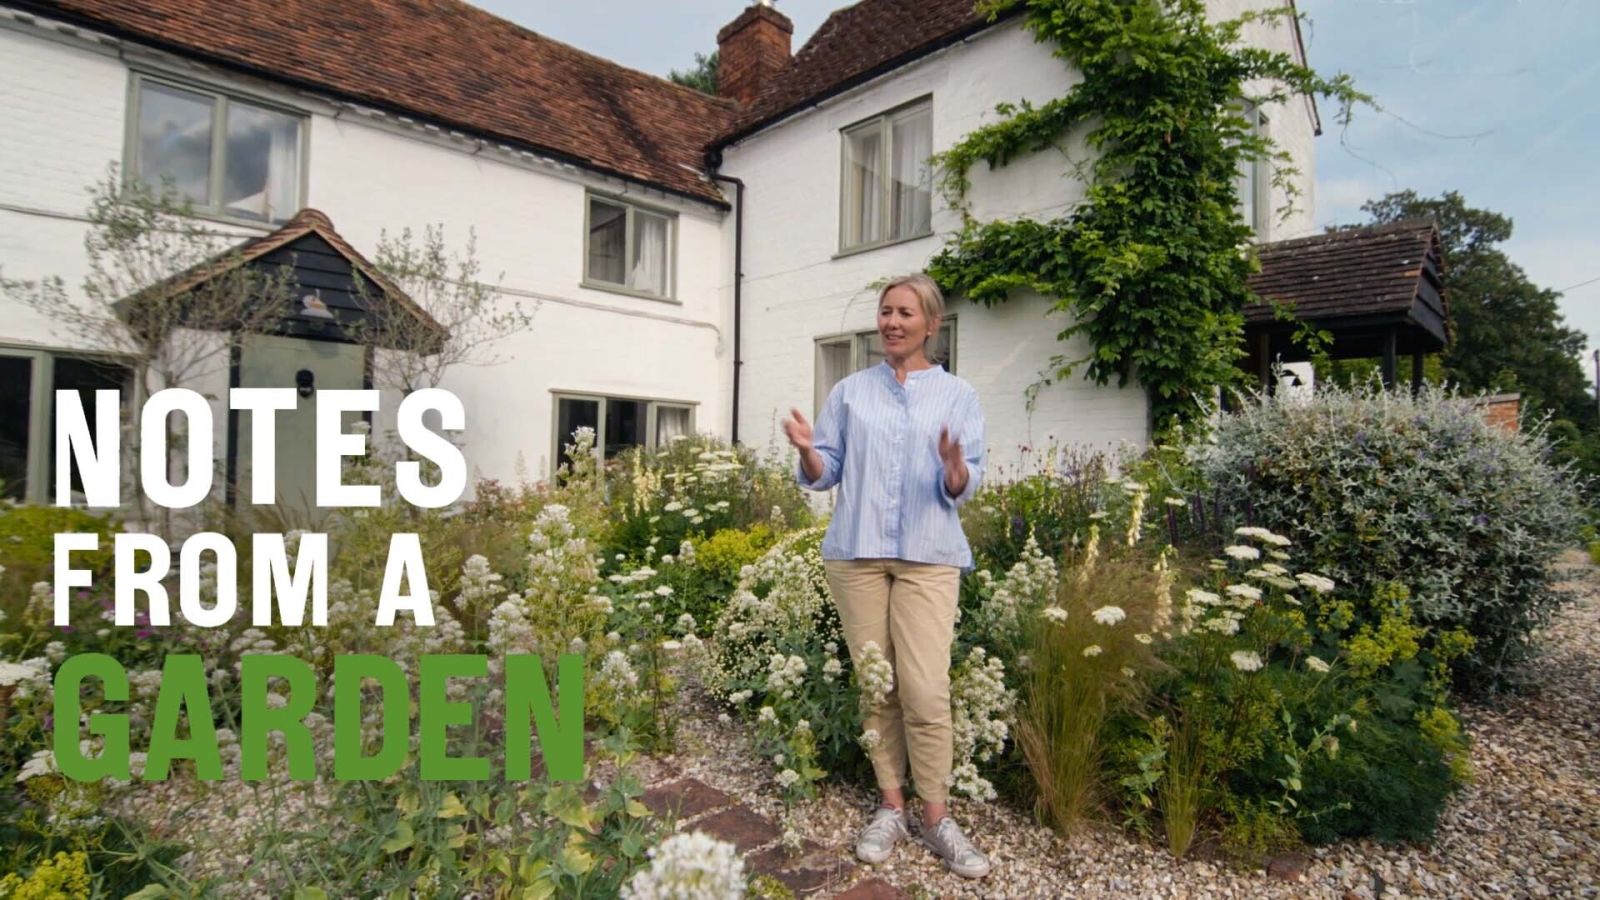 Clare Foster's thriving traditional English garden